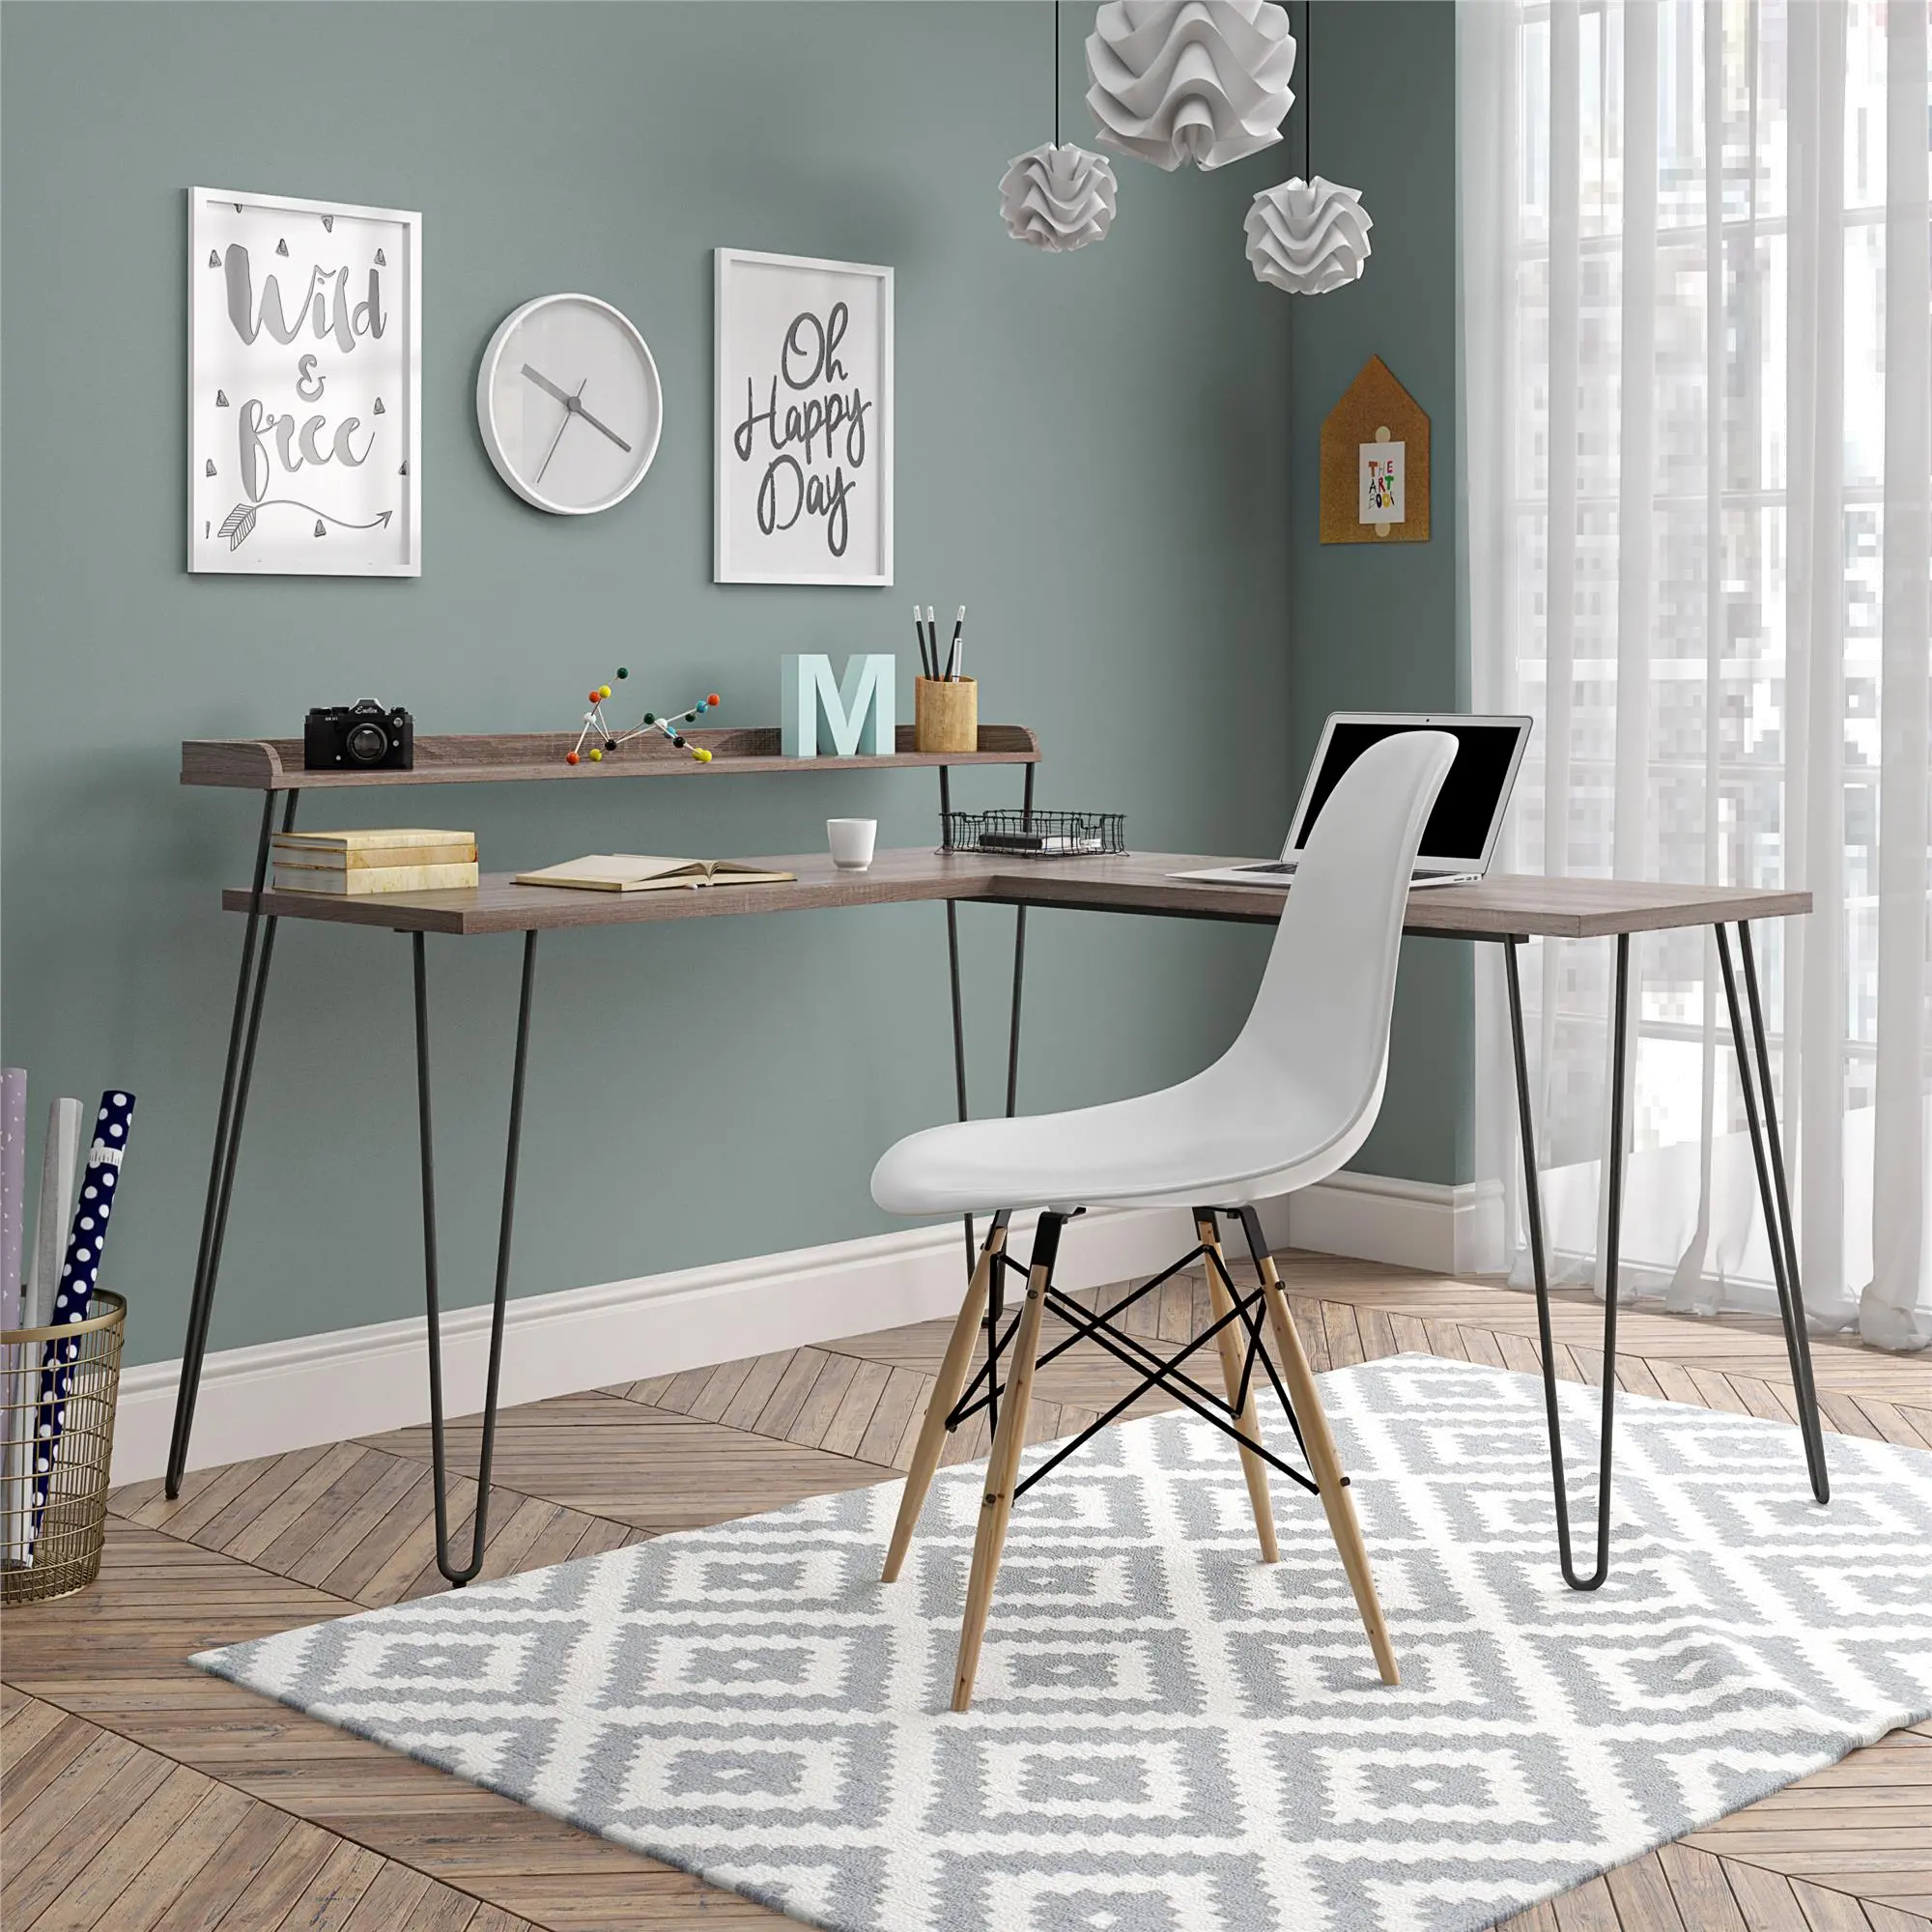 Haven Distressed Gray Oak L-Shaped Desk with Riser